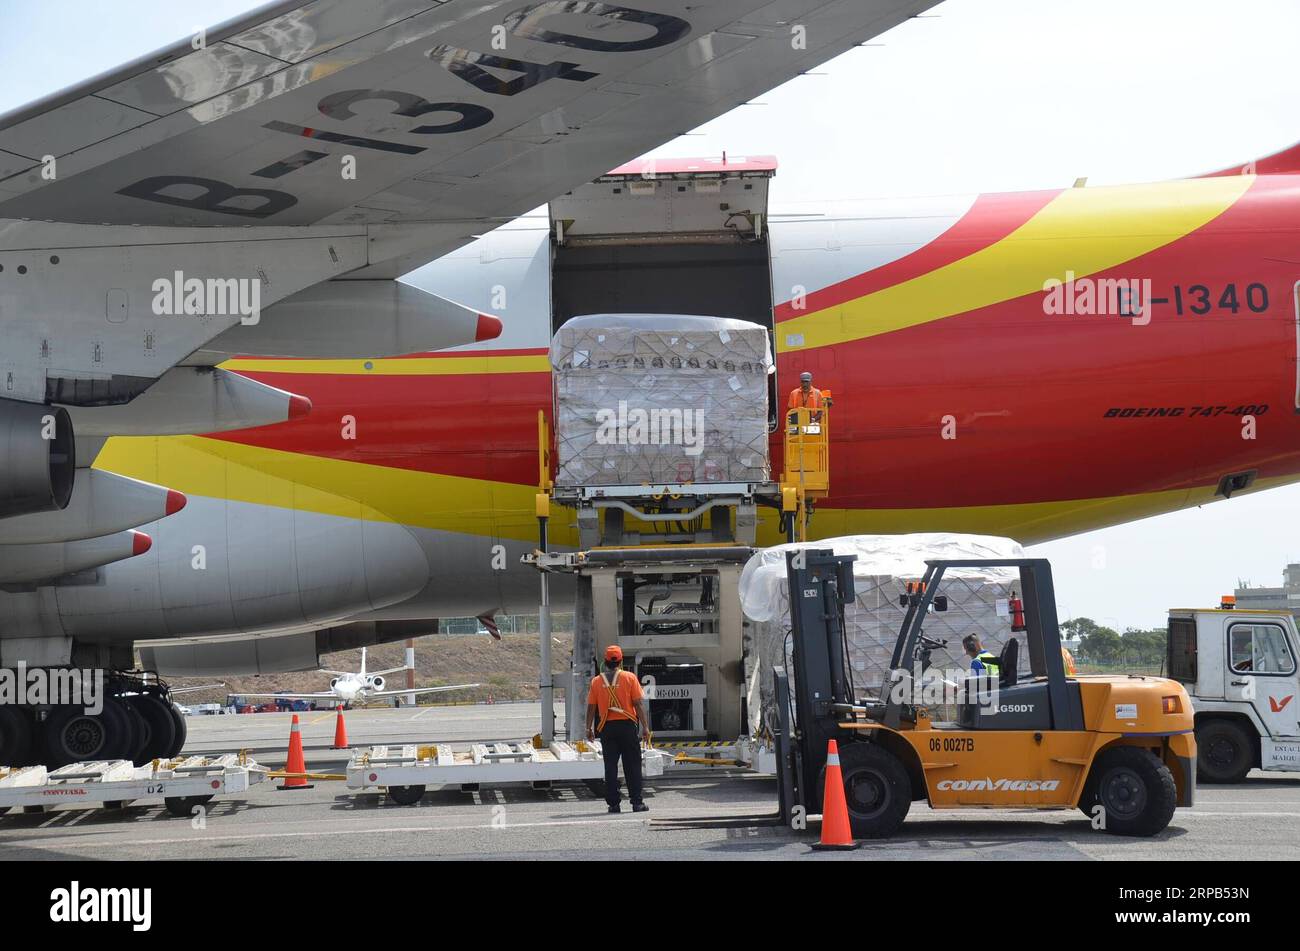 (190528) -- CARACAS, May 28, 2019 (Xinhua) -- An airplane loaded with the 4th batch of humanitarian aid from China arrives at the international airport in Caracas, Venezuela, on May 27, 2019. Venezuela received 68 tons of humanitarian aid offered by China on Monday, the 4th such batch with a shipment of medicine and other medical items. (Xinhua/Xu Ye) VENEZUELA-CARACAS-CHINA-HUMANITARIAN AID PUBLICATIONxNOTxINxCHN Stock Photo